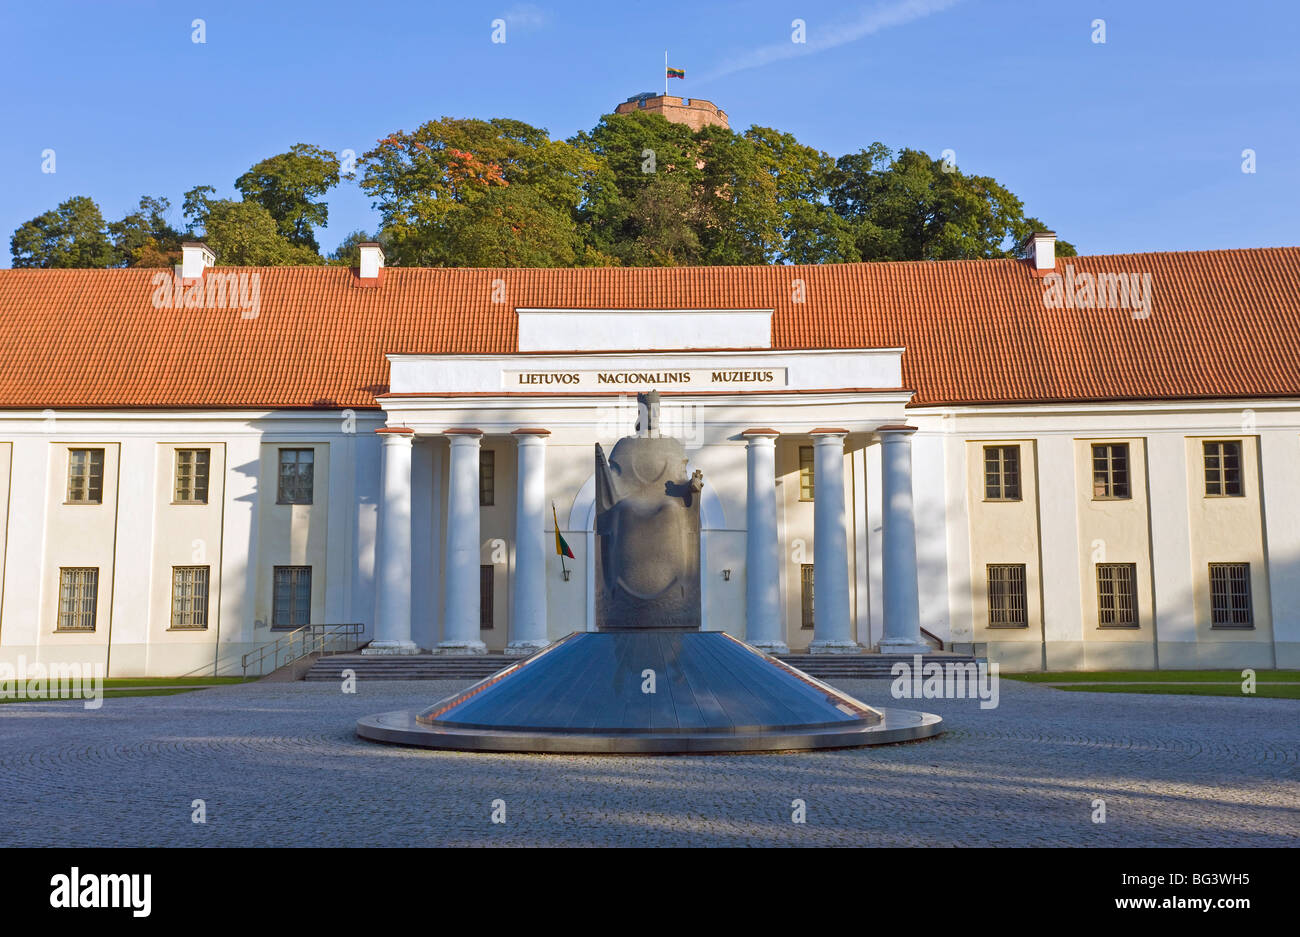 Lithuanian National Museum, Vilnius, Lithuania, Baltic States, Europe Stock Photo